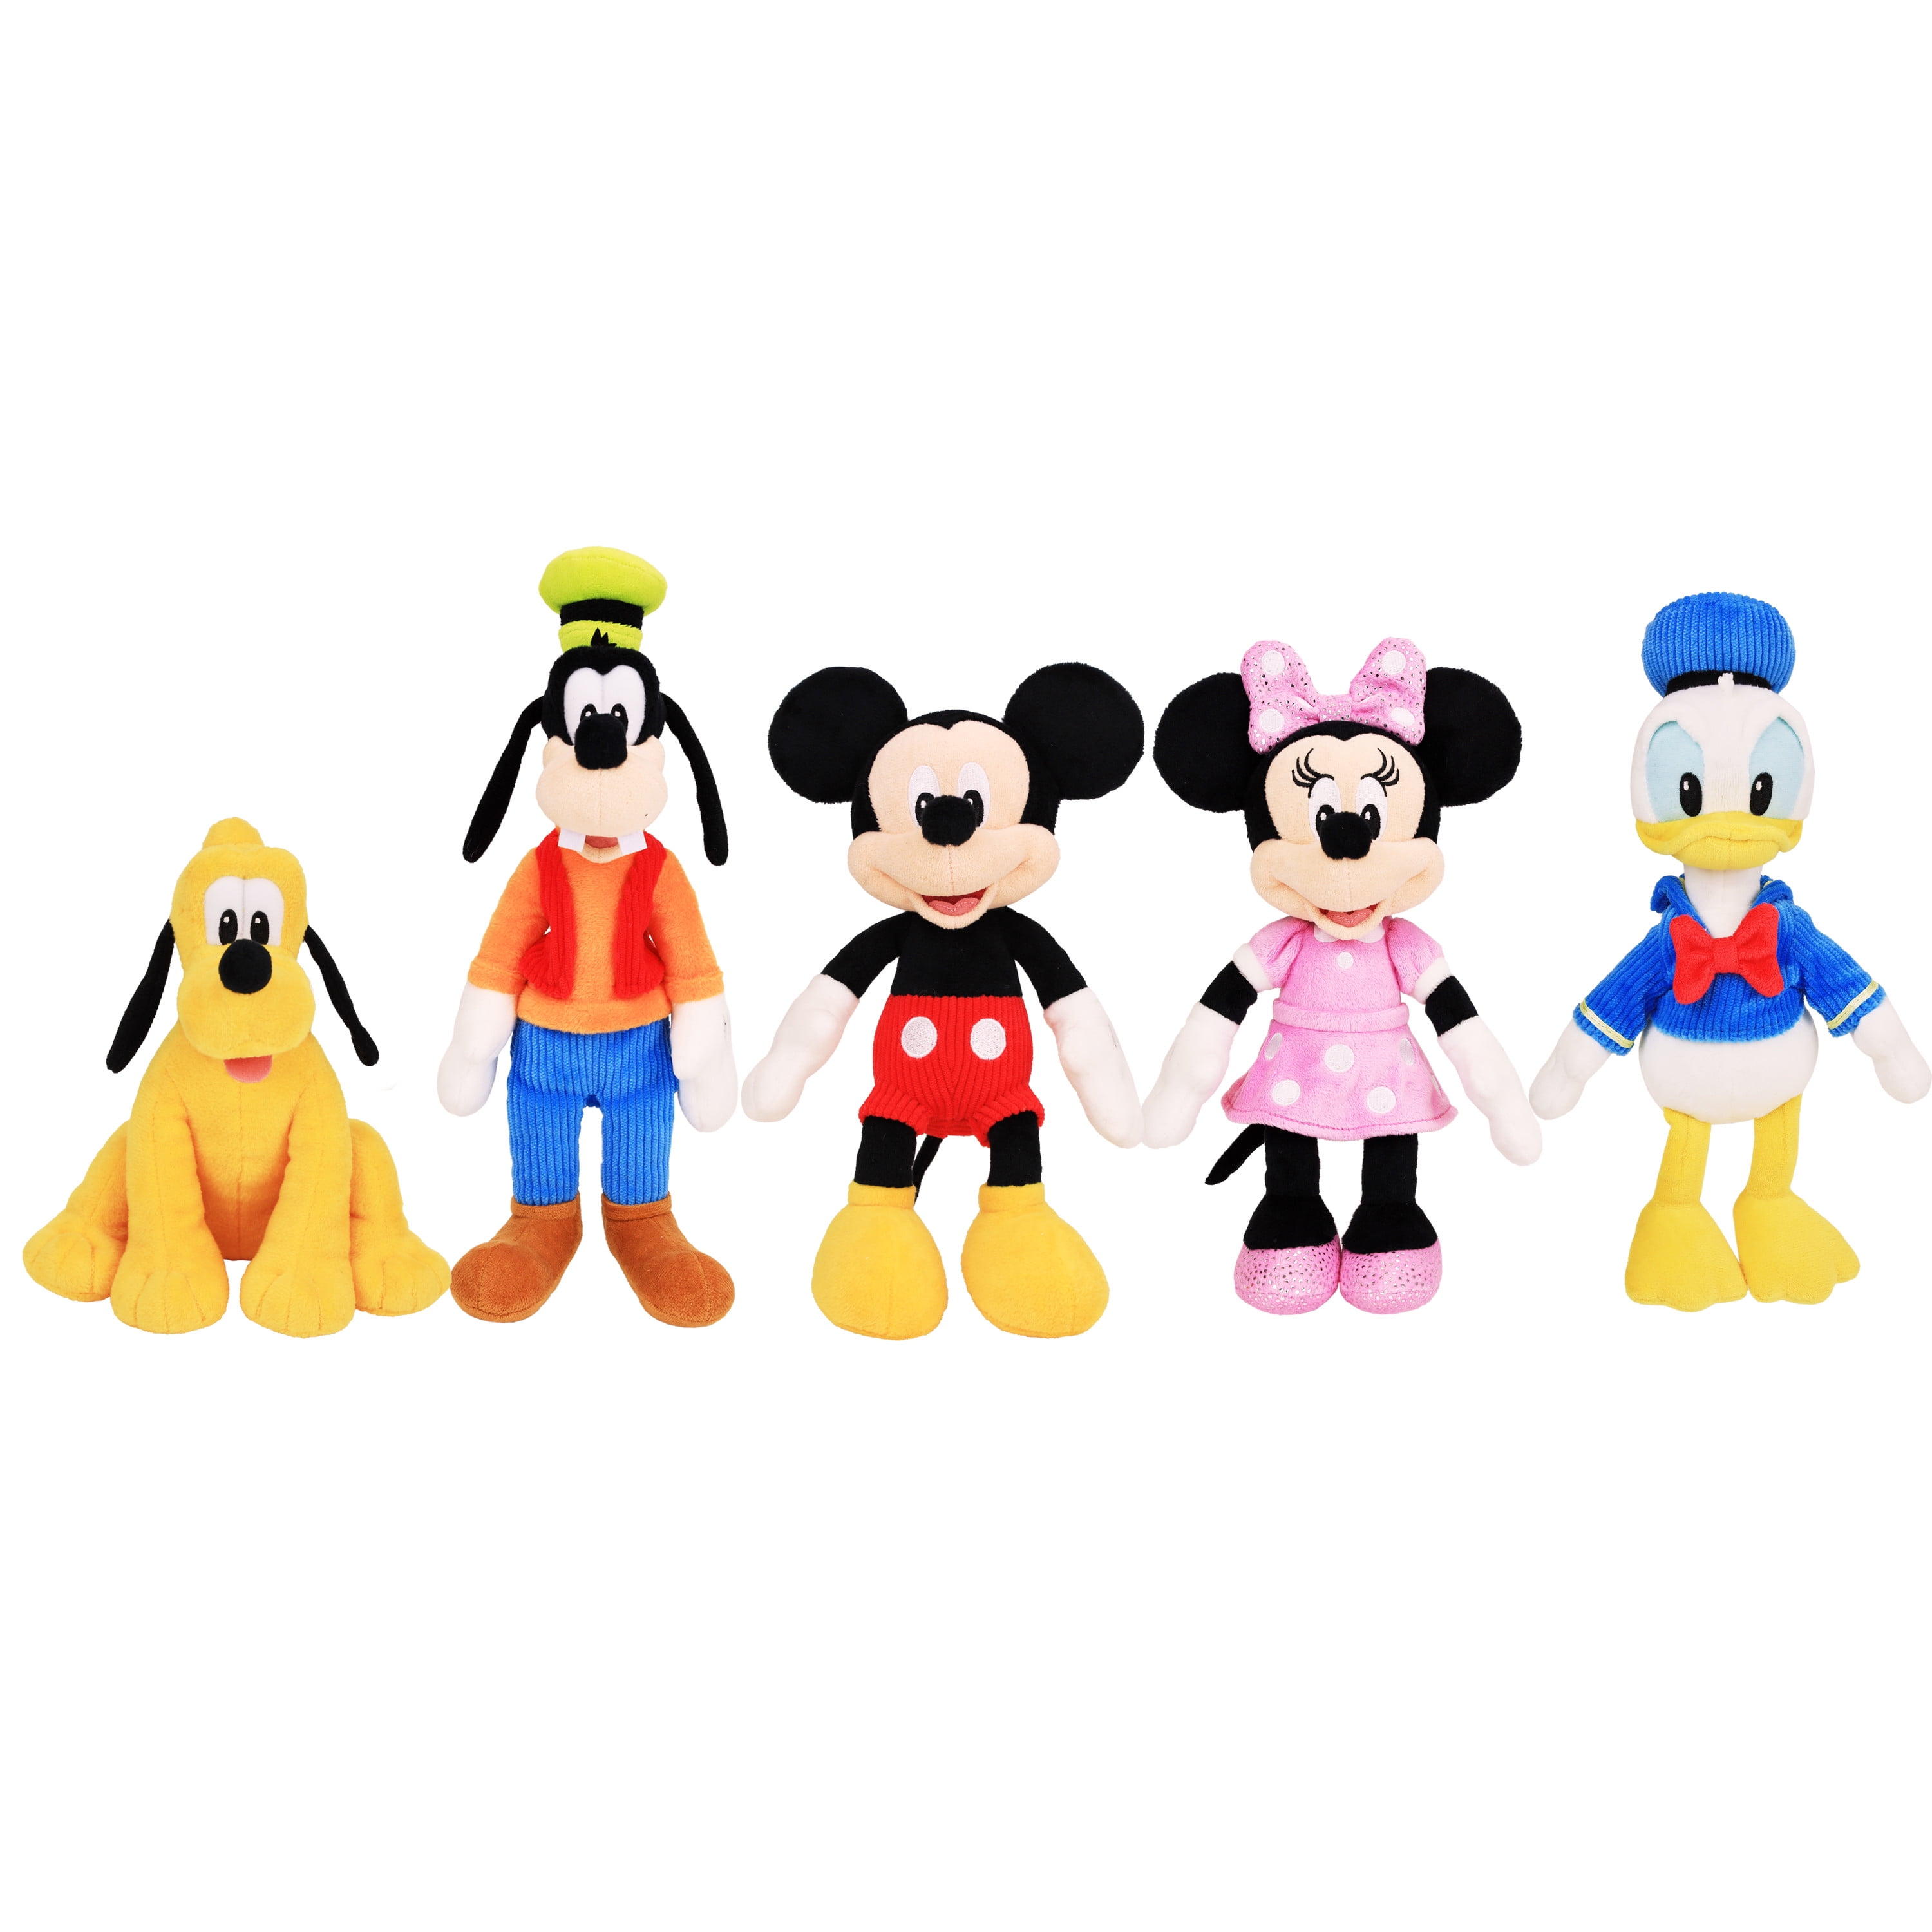 Cause roll Lunar surface Mickey Mouse Clubhouse 9-inch Bean Plush 5-pack, Mickey Mouse, Minnie  Mouse, Donald Duck, Goofy, and Pluto, Stuffed Animals, Kids Toys for Ages 2  up - Walmart.com